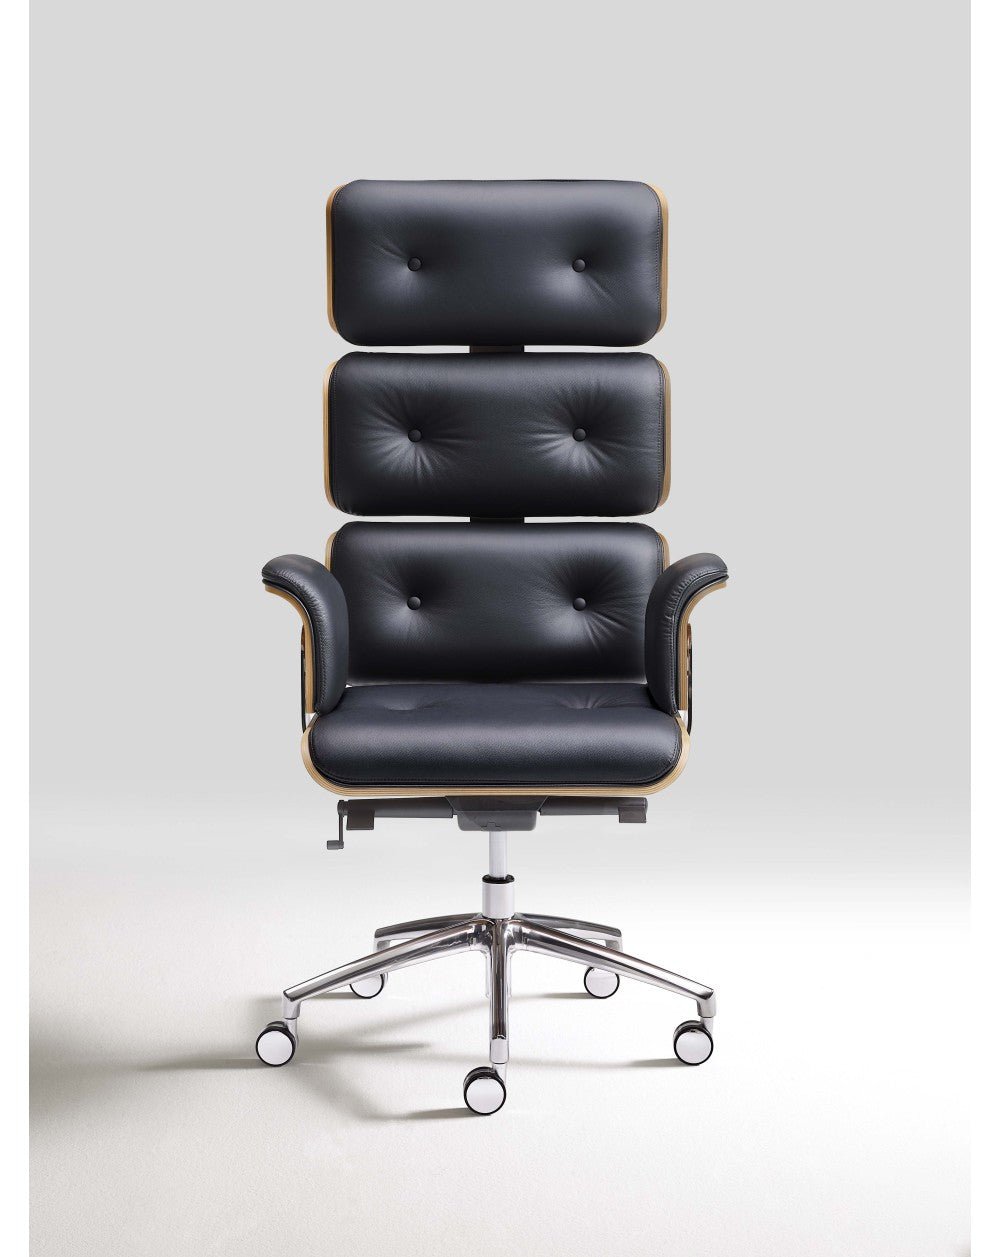 Armadillo Chrome-Black Luxury Office Chair with High Back / Genuine Italian Leather - |VESIMI Design| Luxury and Rustic bathrooms online